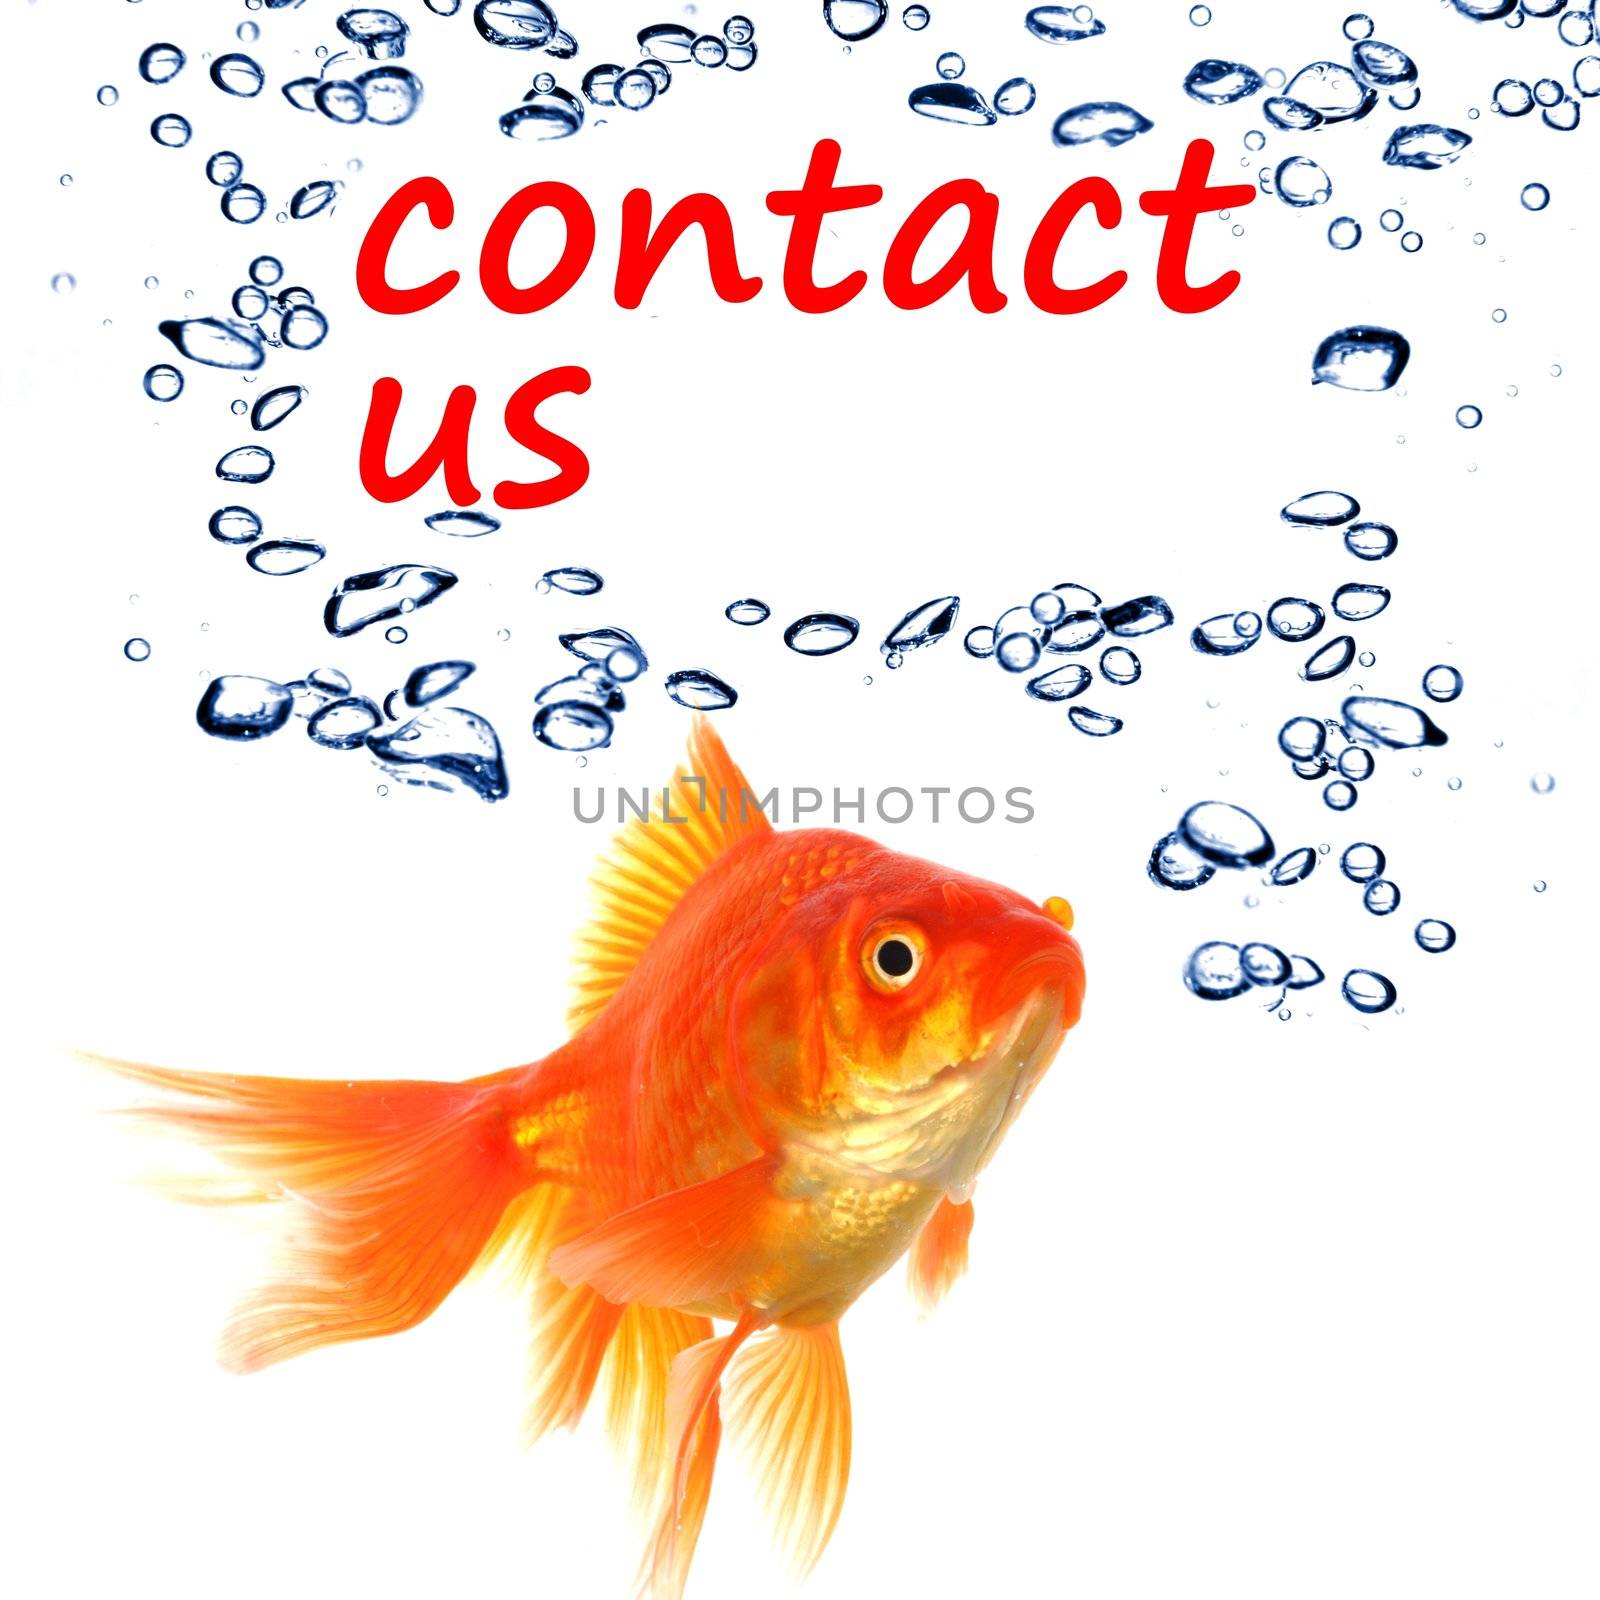 contact us concept with goldfish showing support service or email communication